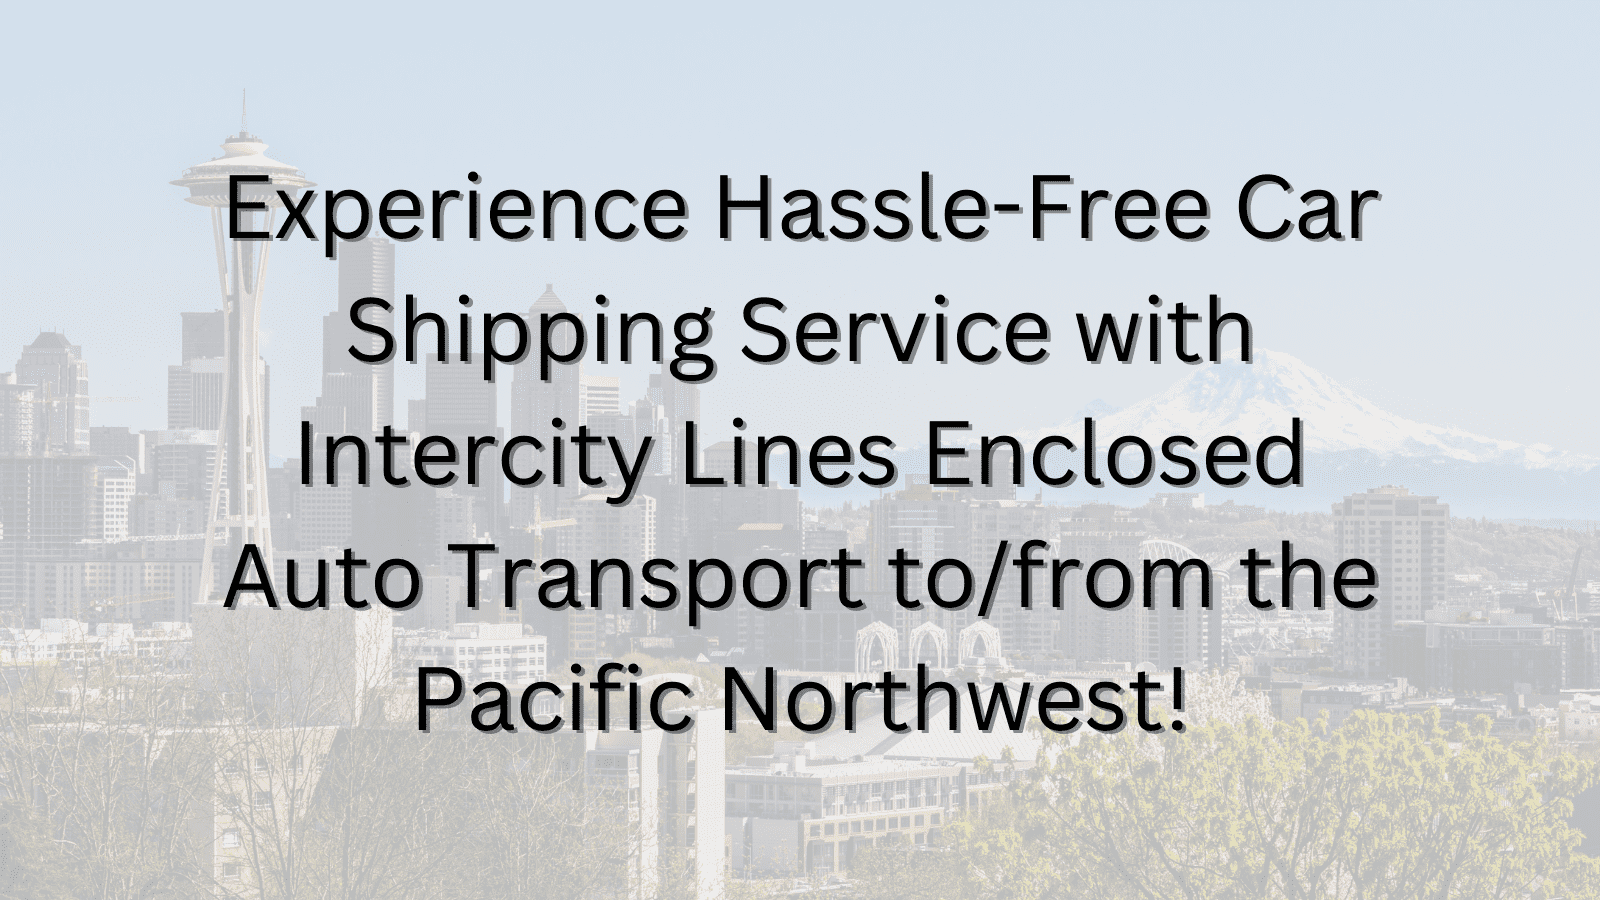 Pacific Northwest car shipping